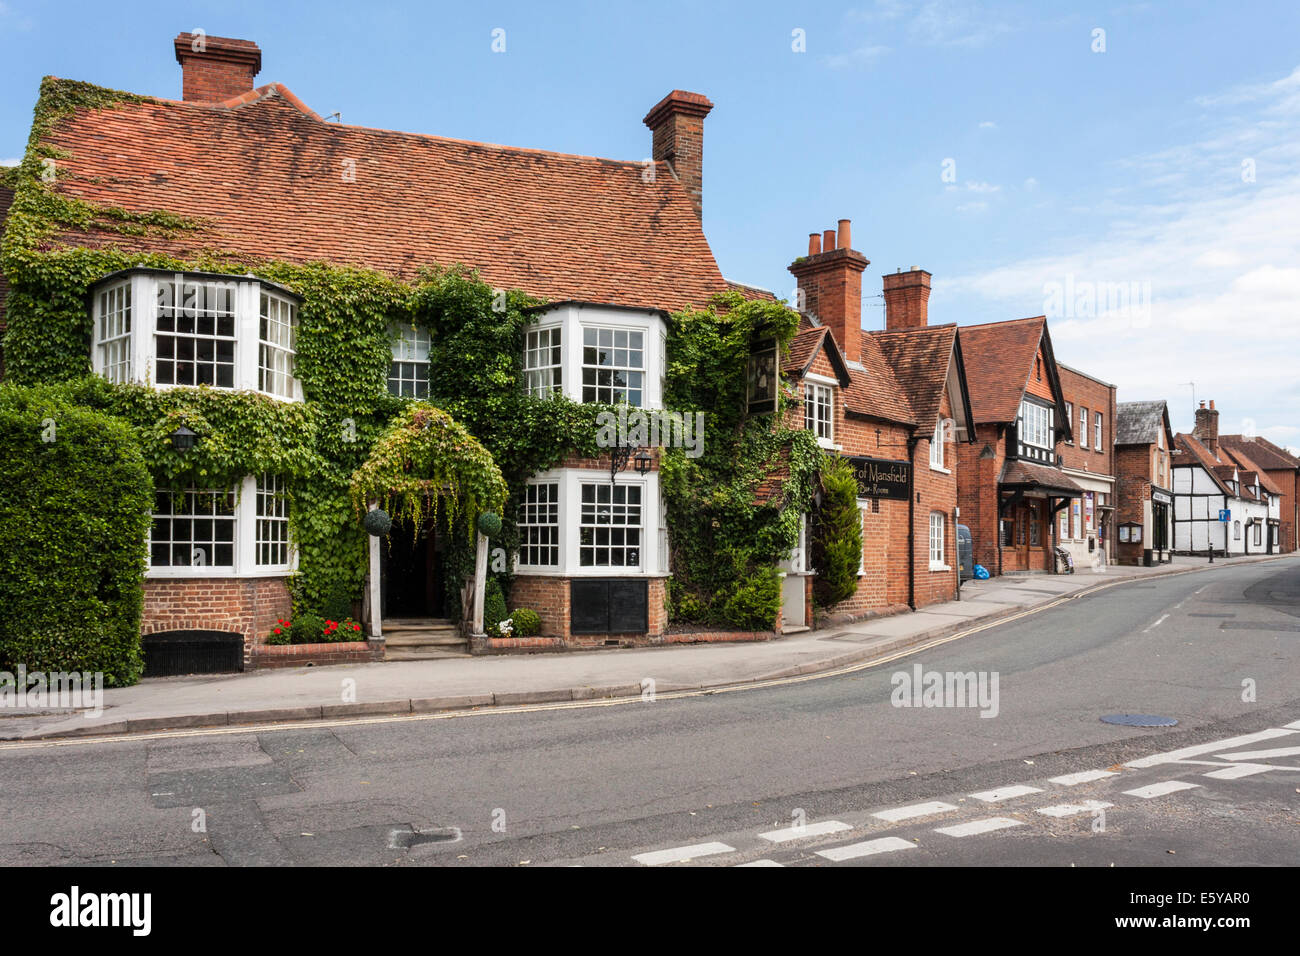 The Miller of Mansfield pub is an 18th century Coaching Inn in Goring-on-Thames, Oxfordshire, England, GB, UK. Stock Photo